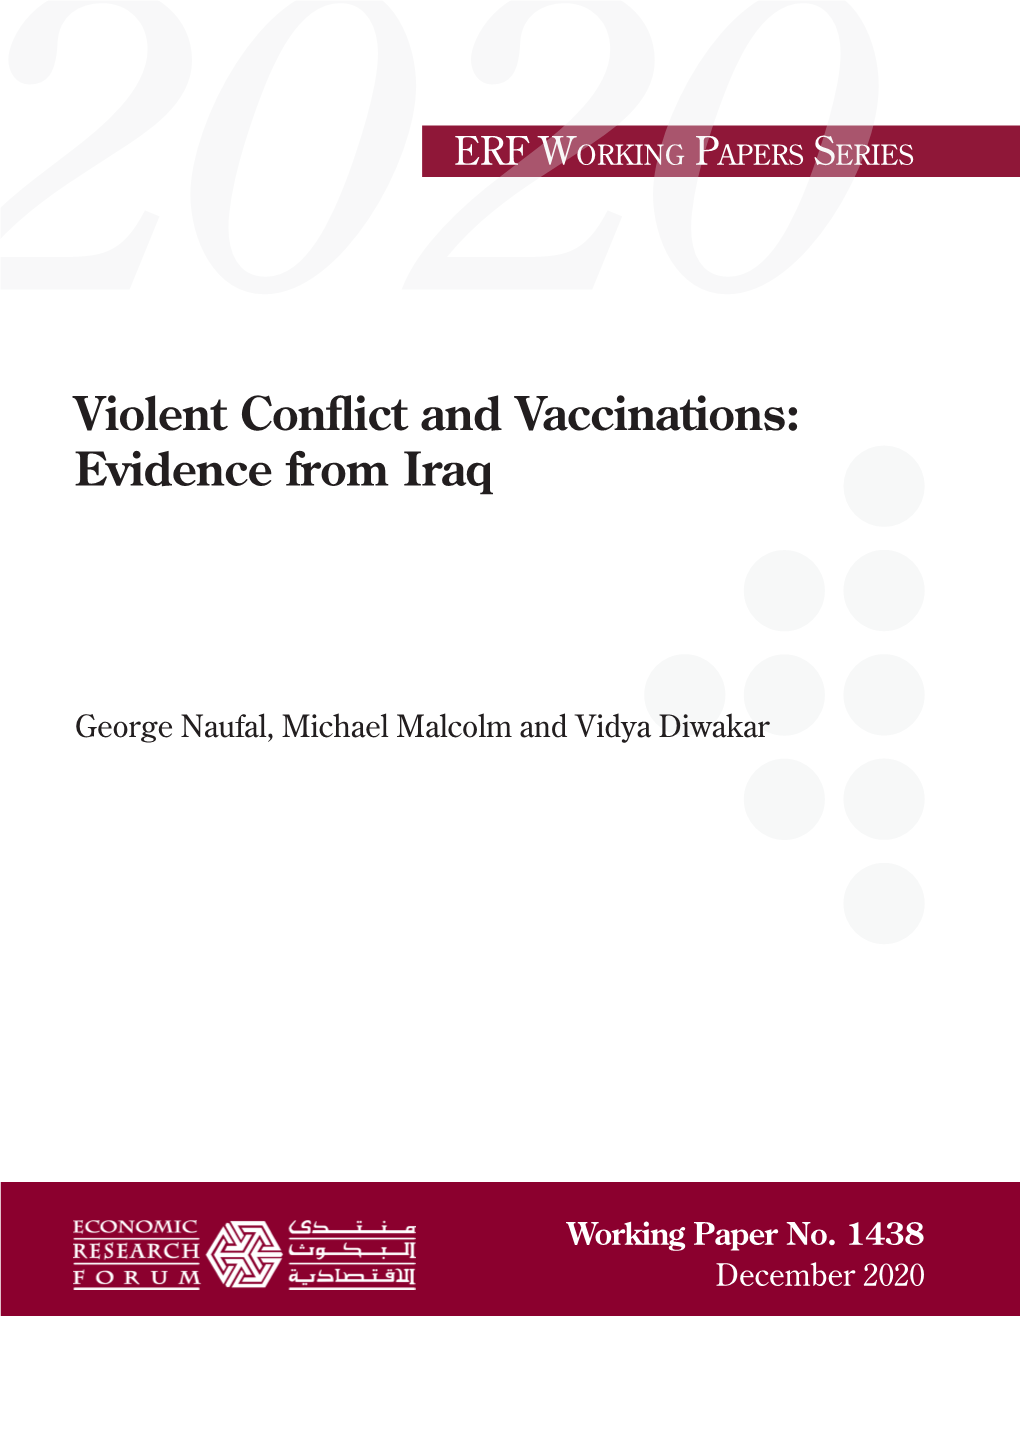 Violent Conflict and Vaccinations: Evidence from Iraq